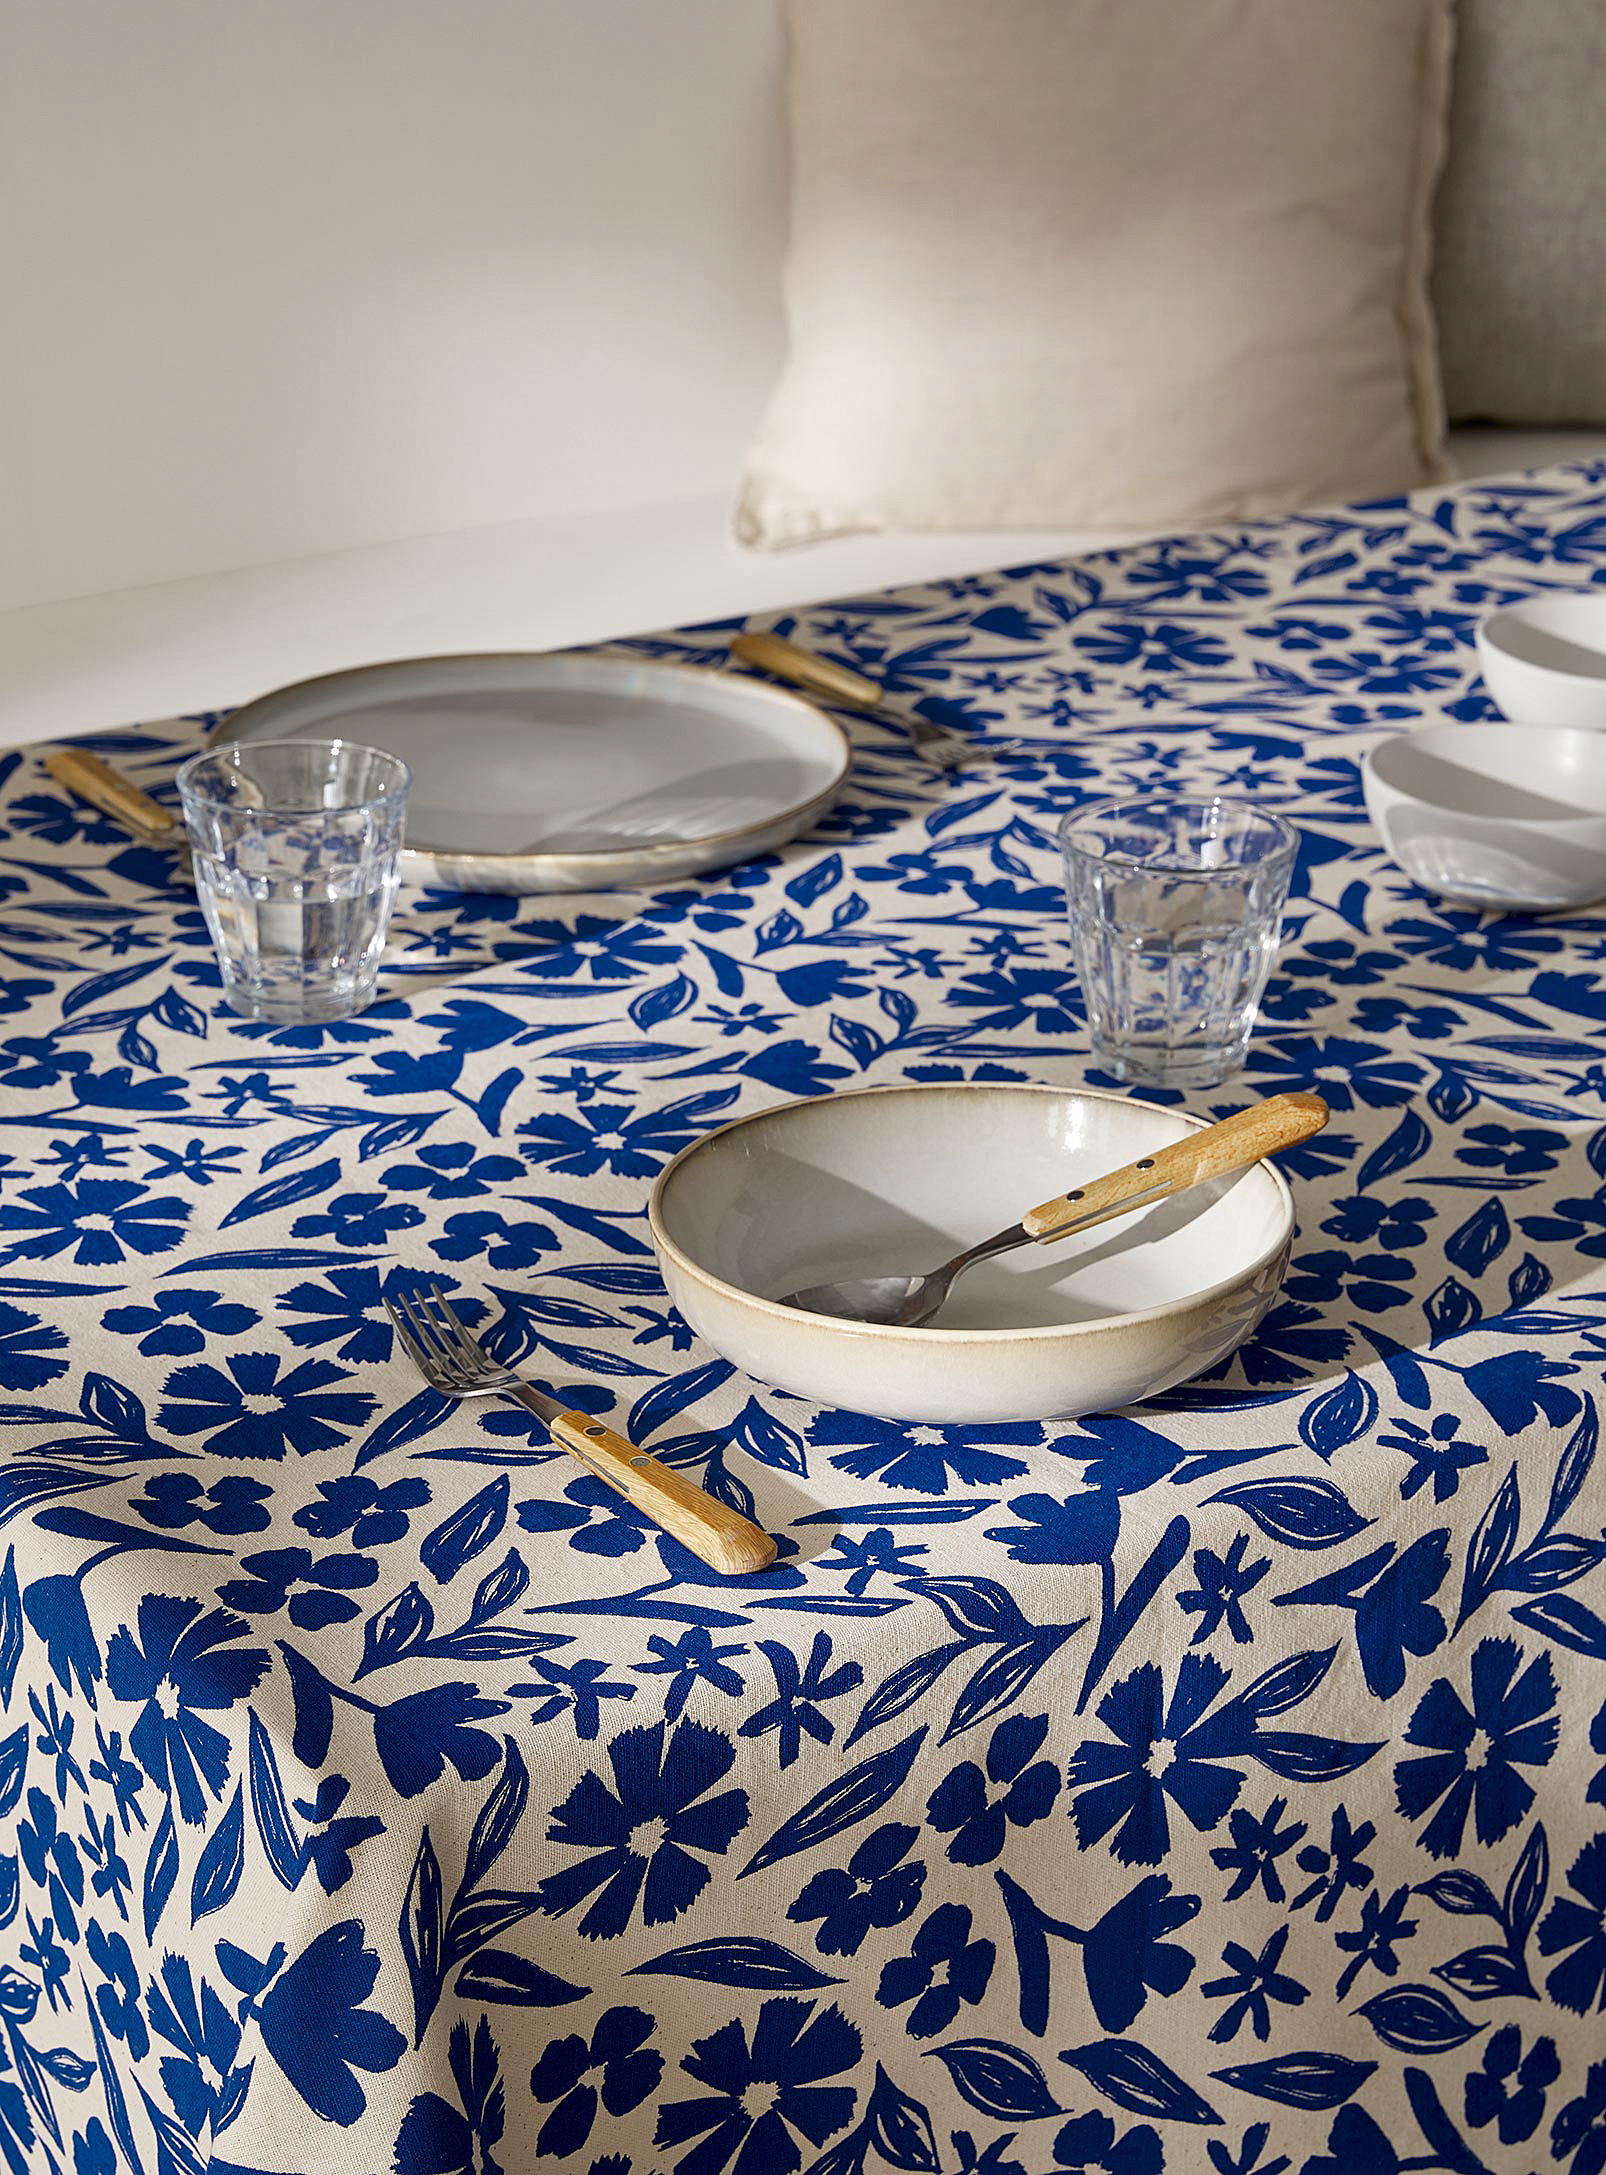 Simons Maison Indigo Flowers Recycled Cotton Tablecloth In Patterned Ecru